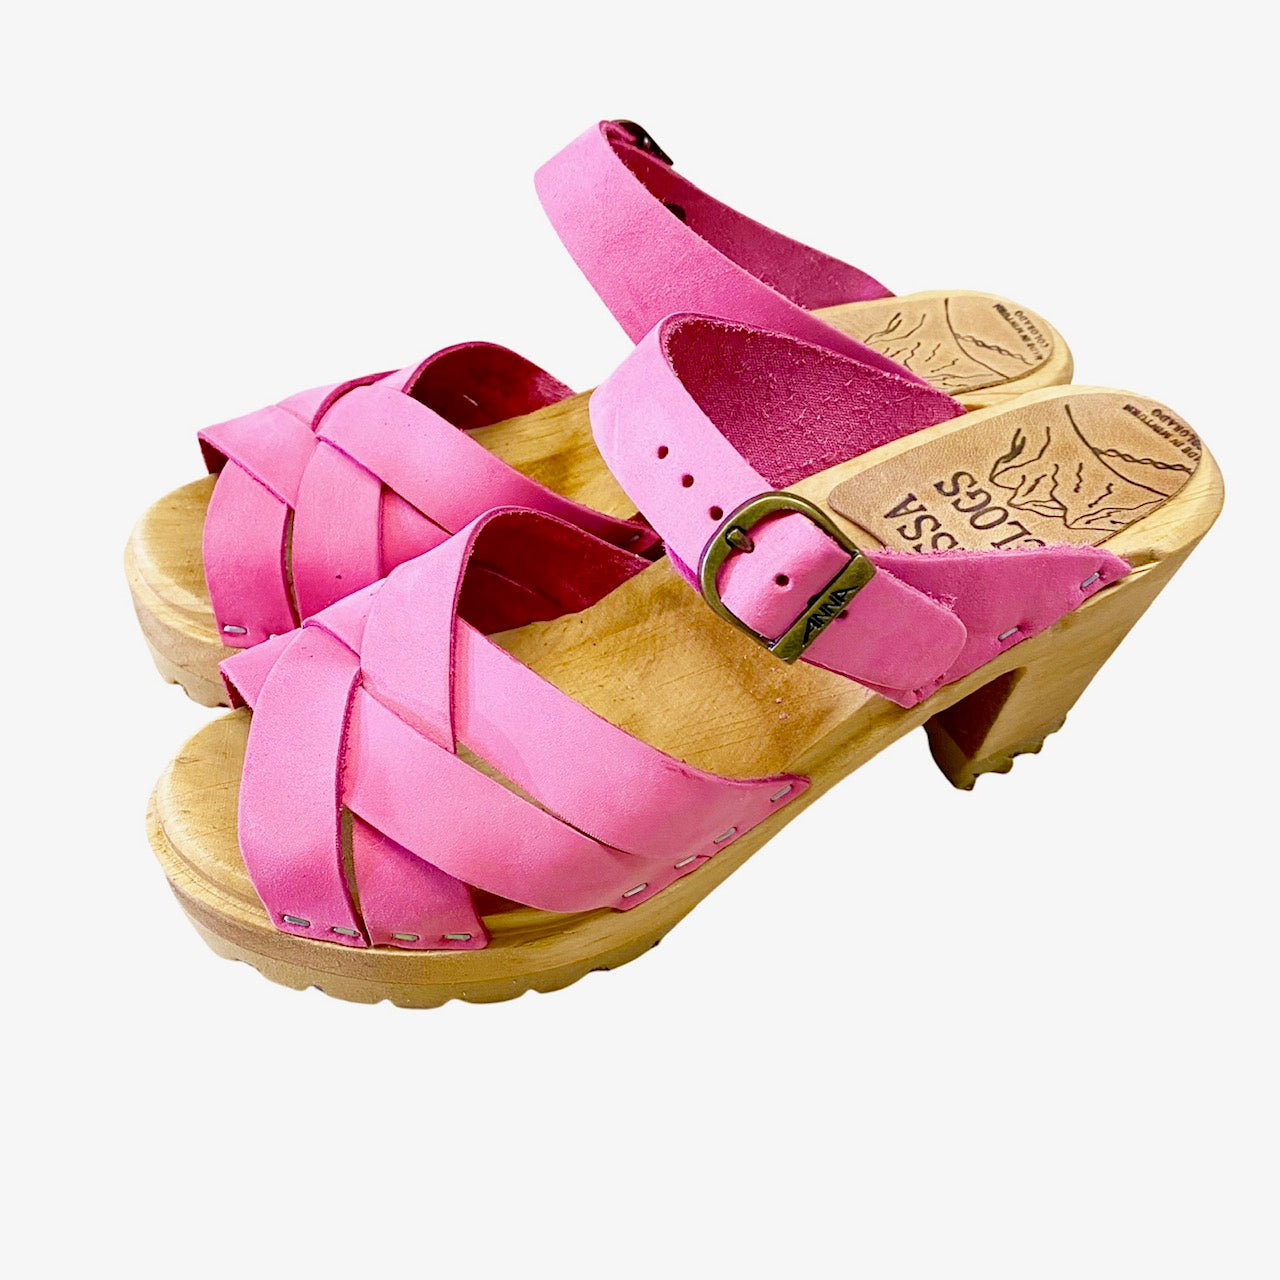 Women's Heel Shoes at best price in Gurgaon by Bruno Sales Pvt. Ltd. | ID:  7069509548